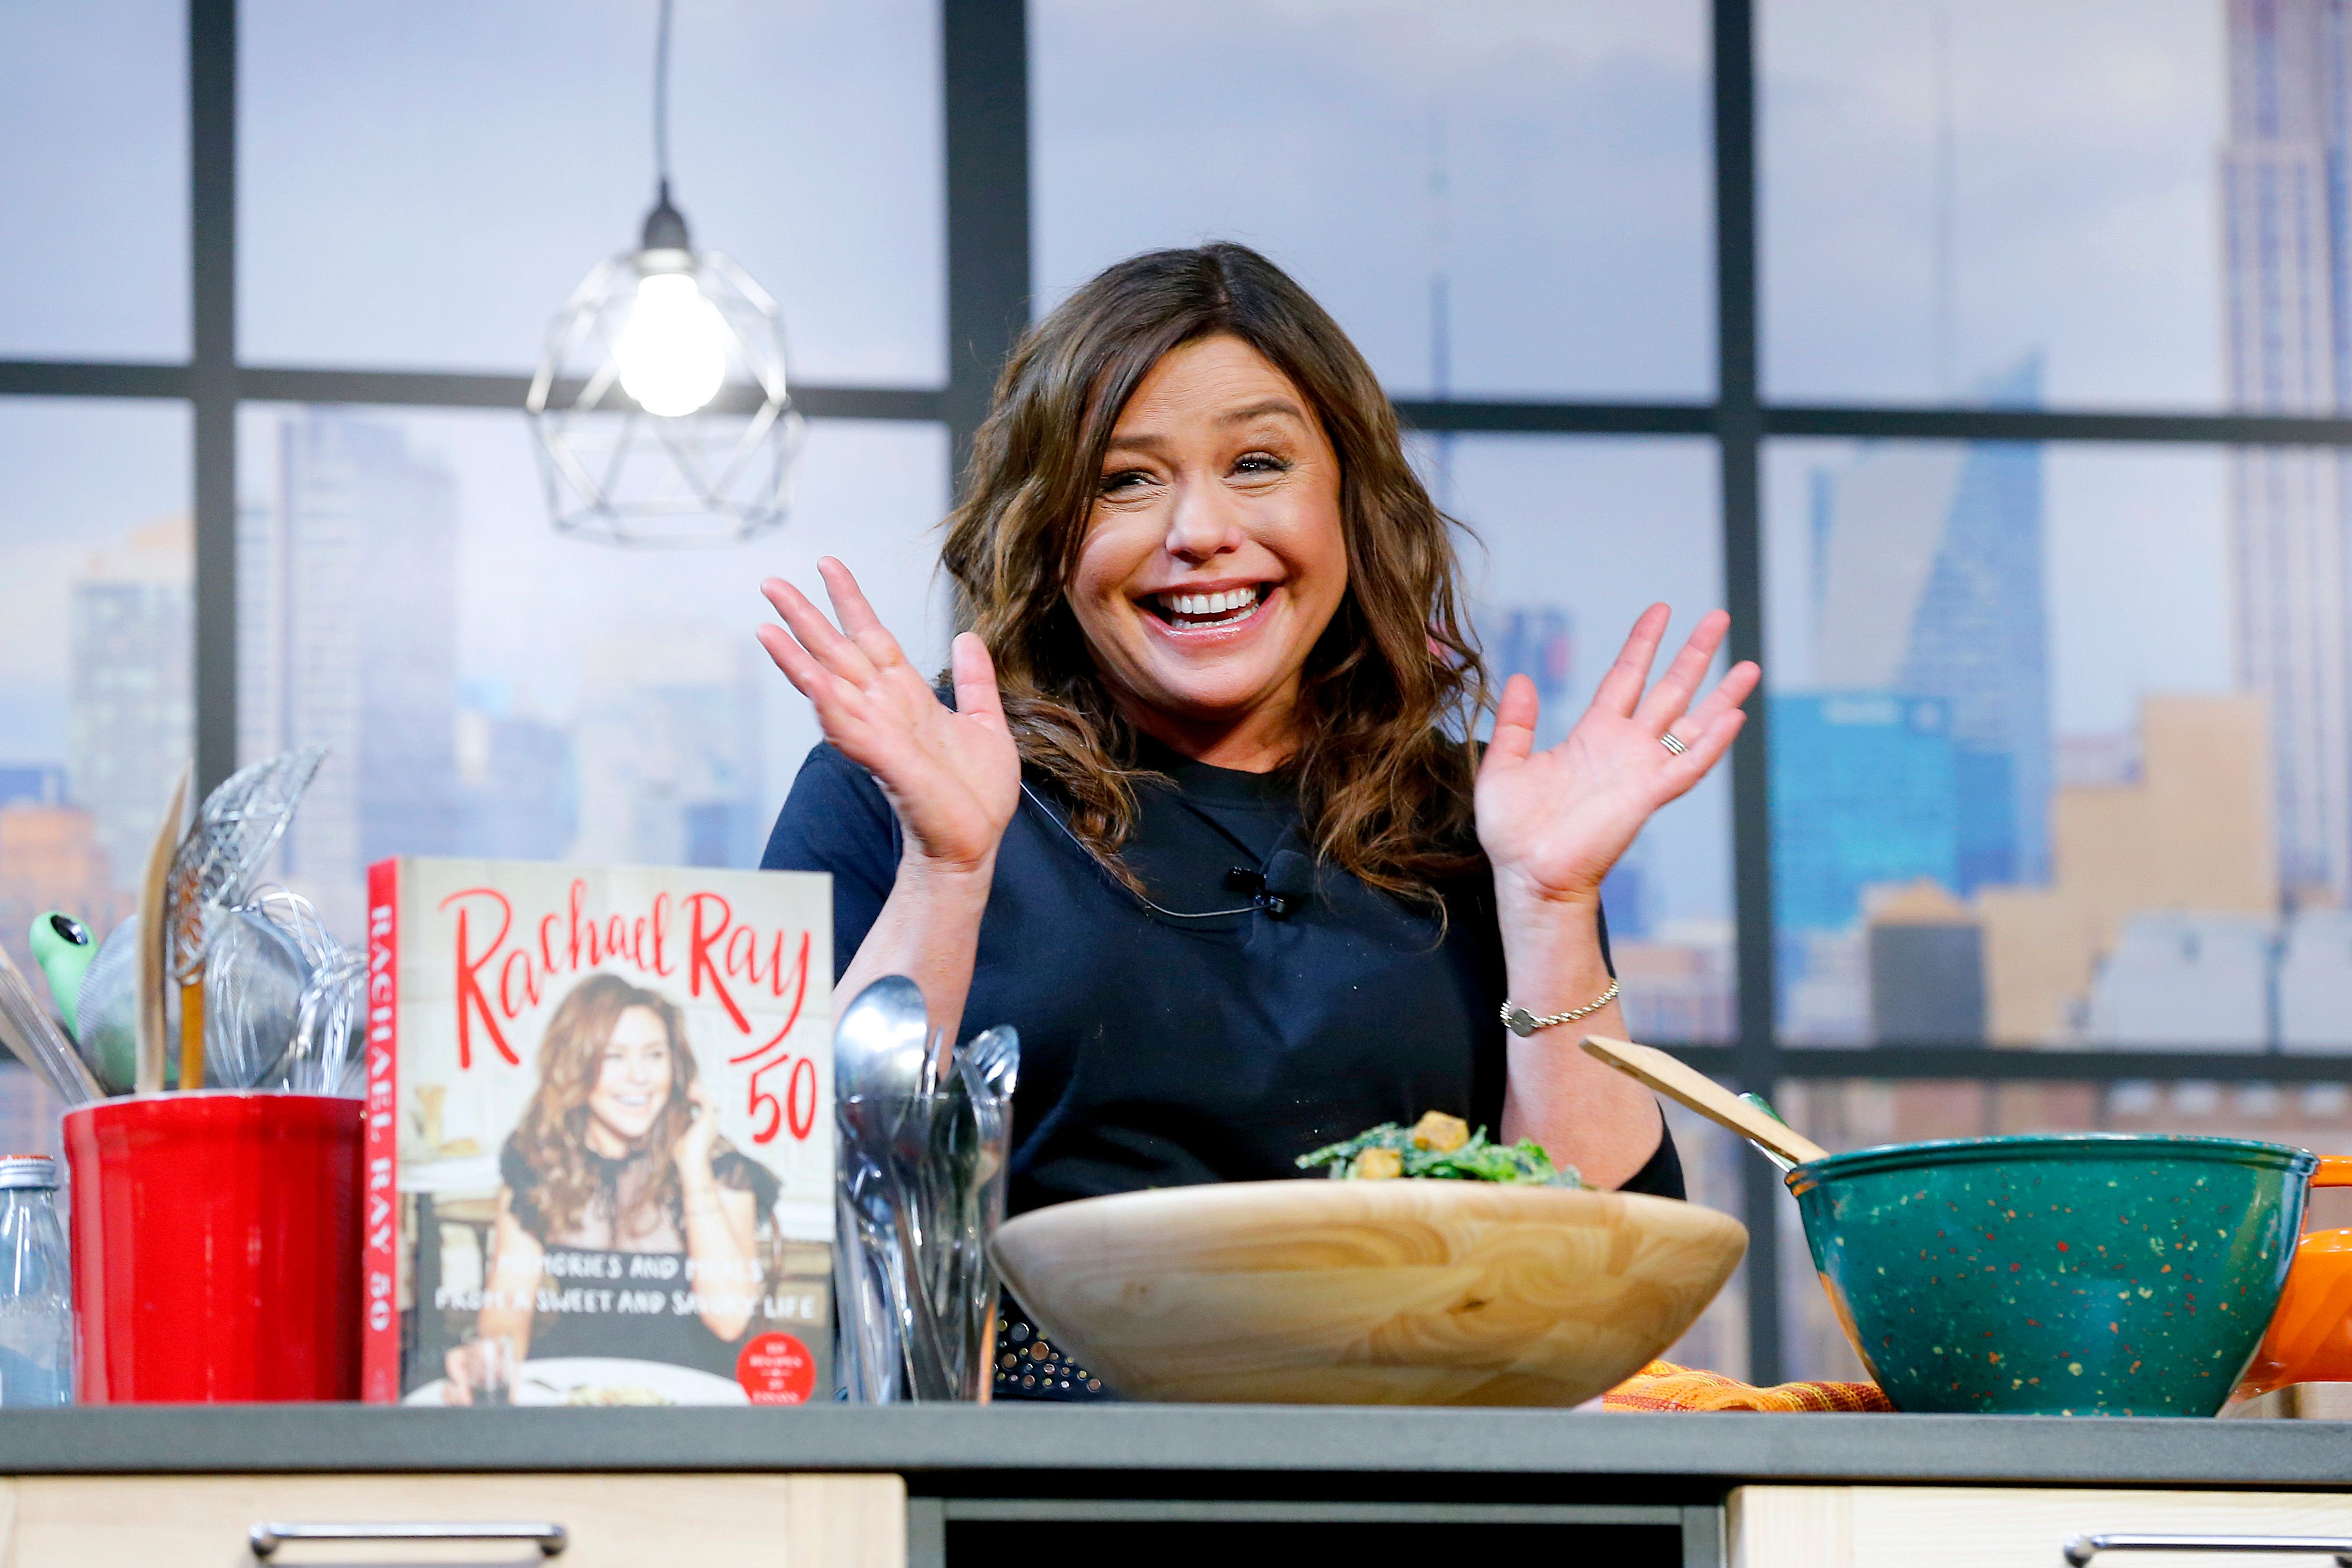  Rachael Ray at the Grand Tasting at The IKEA Kitchen in 2019 in New York City | Source: Getty Images